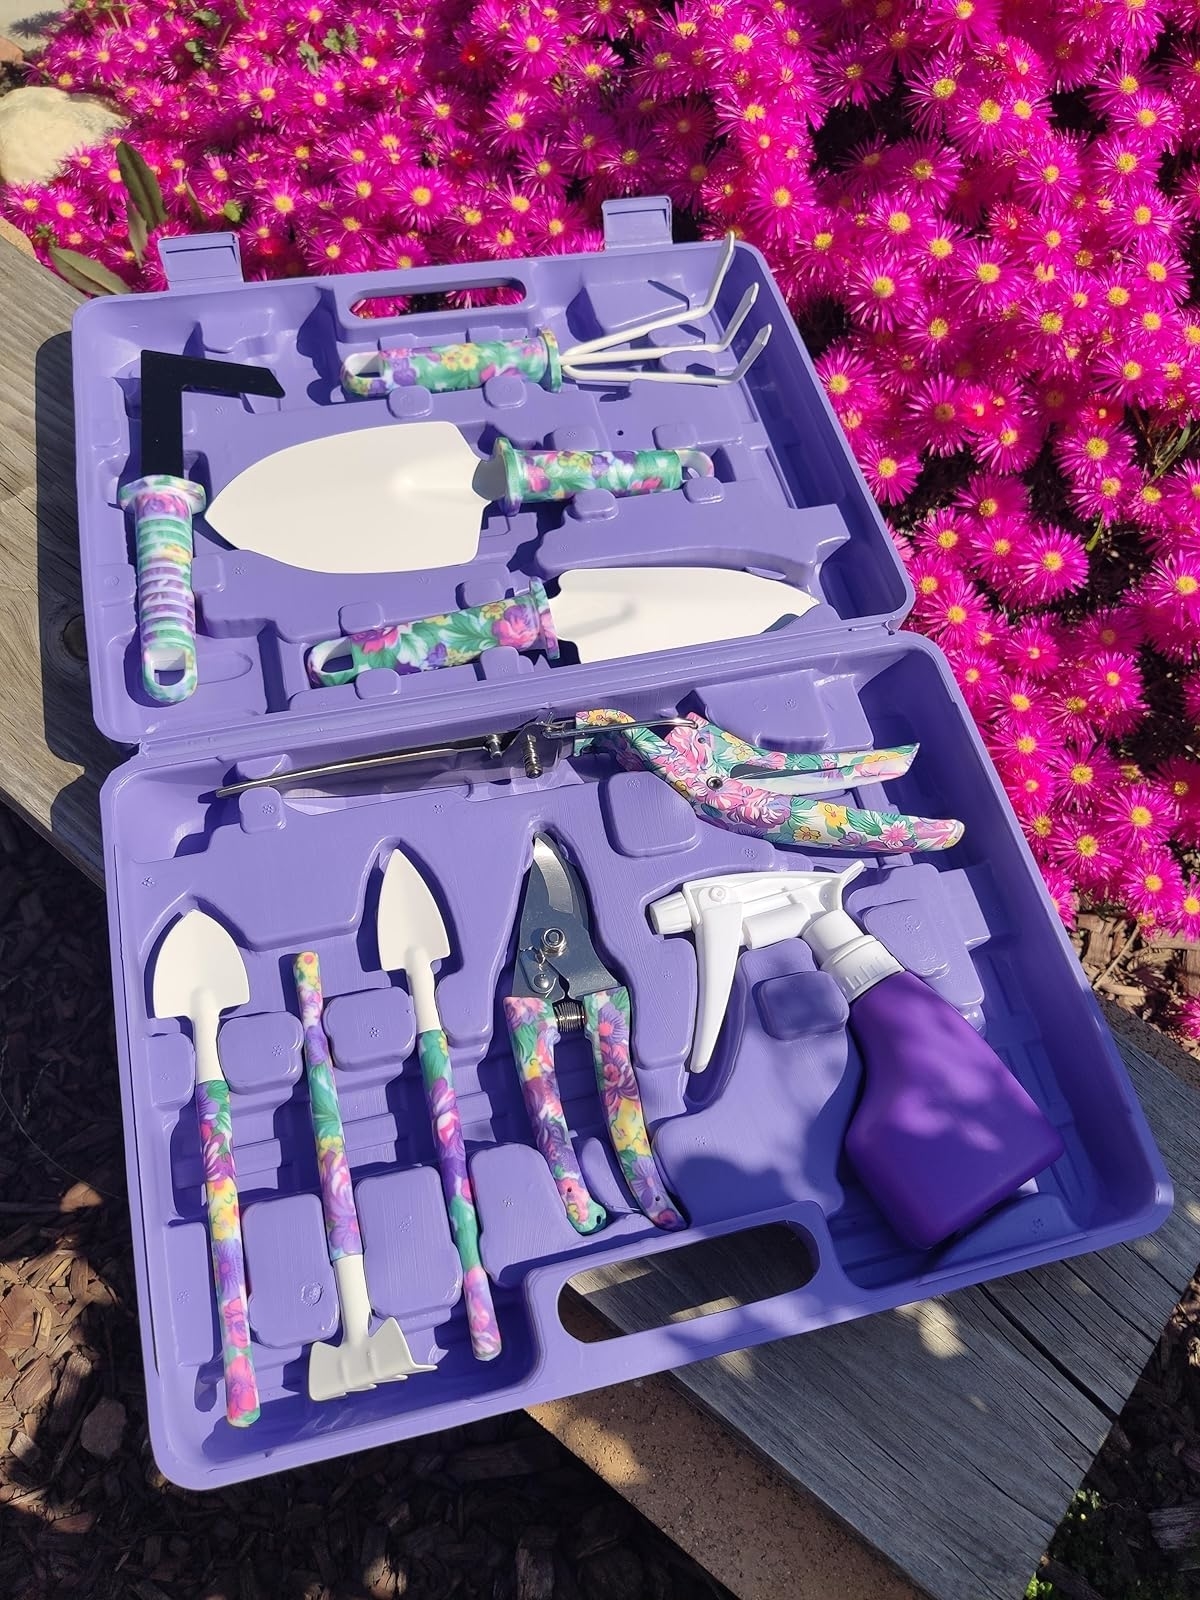 Gardening toolset with floral patterns, including trowels and pruners, displayed open on a floral background